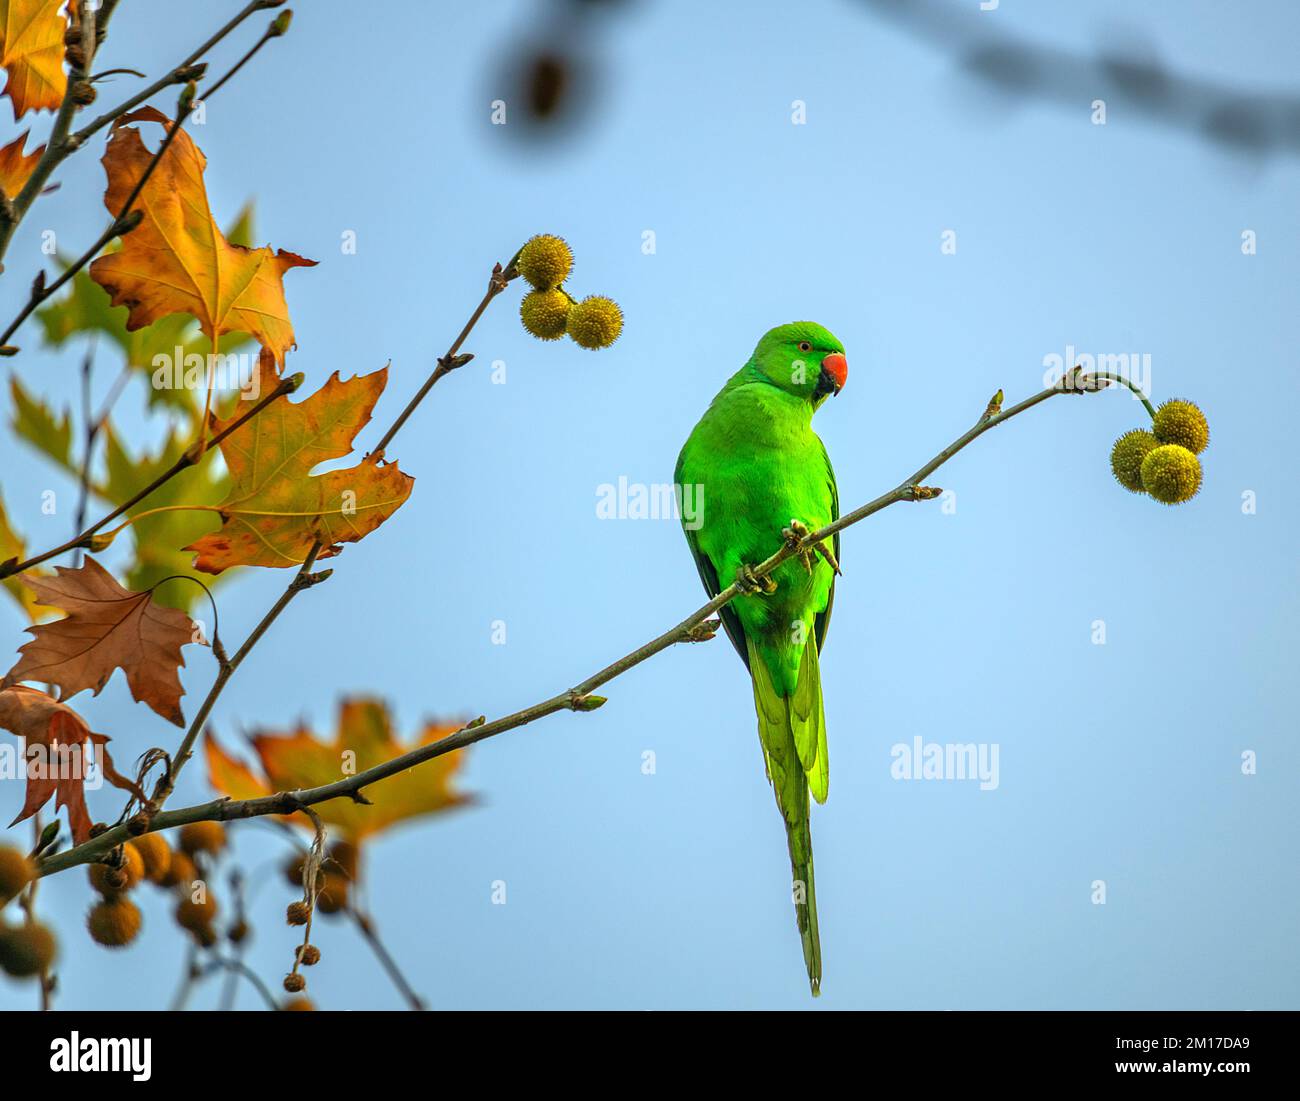 parrot resting on tree in izmir city forest Stock Photo